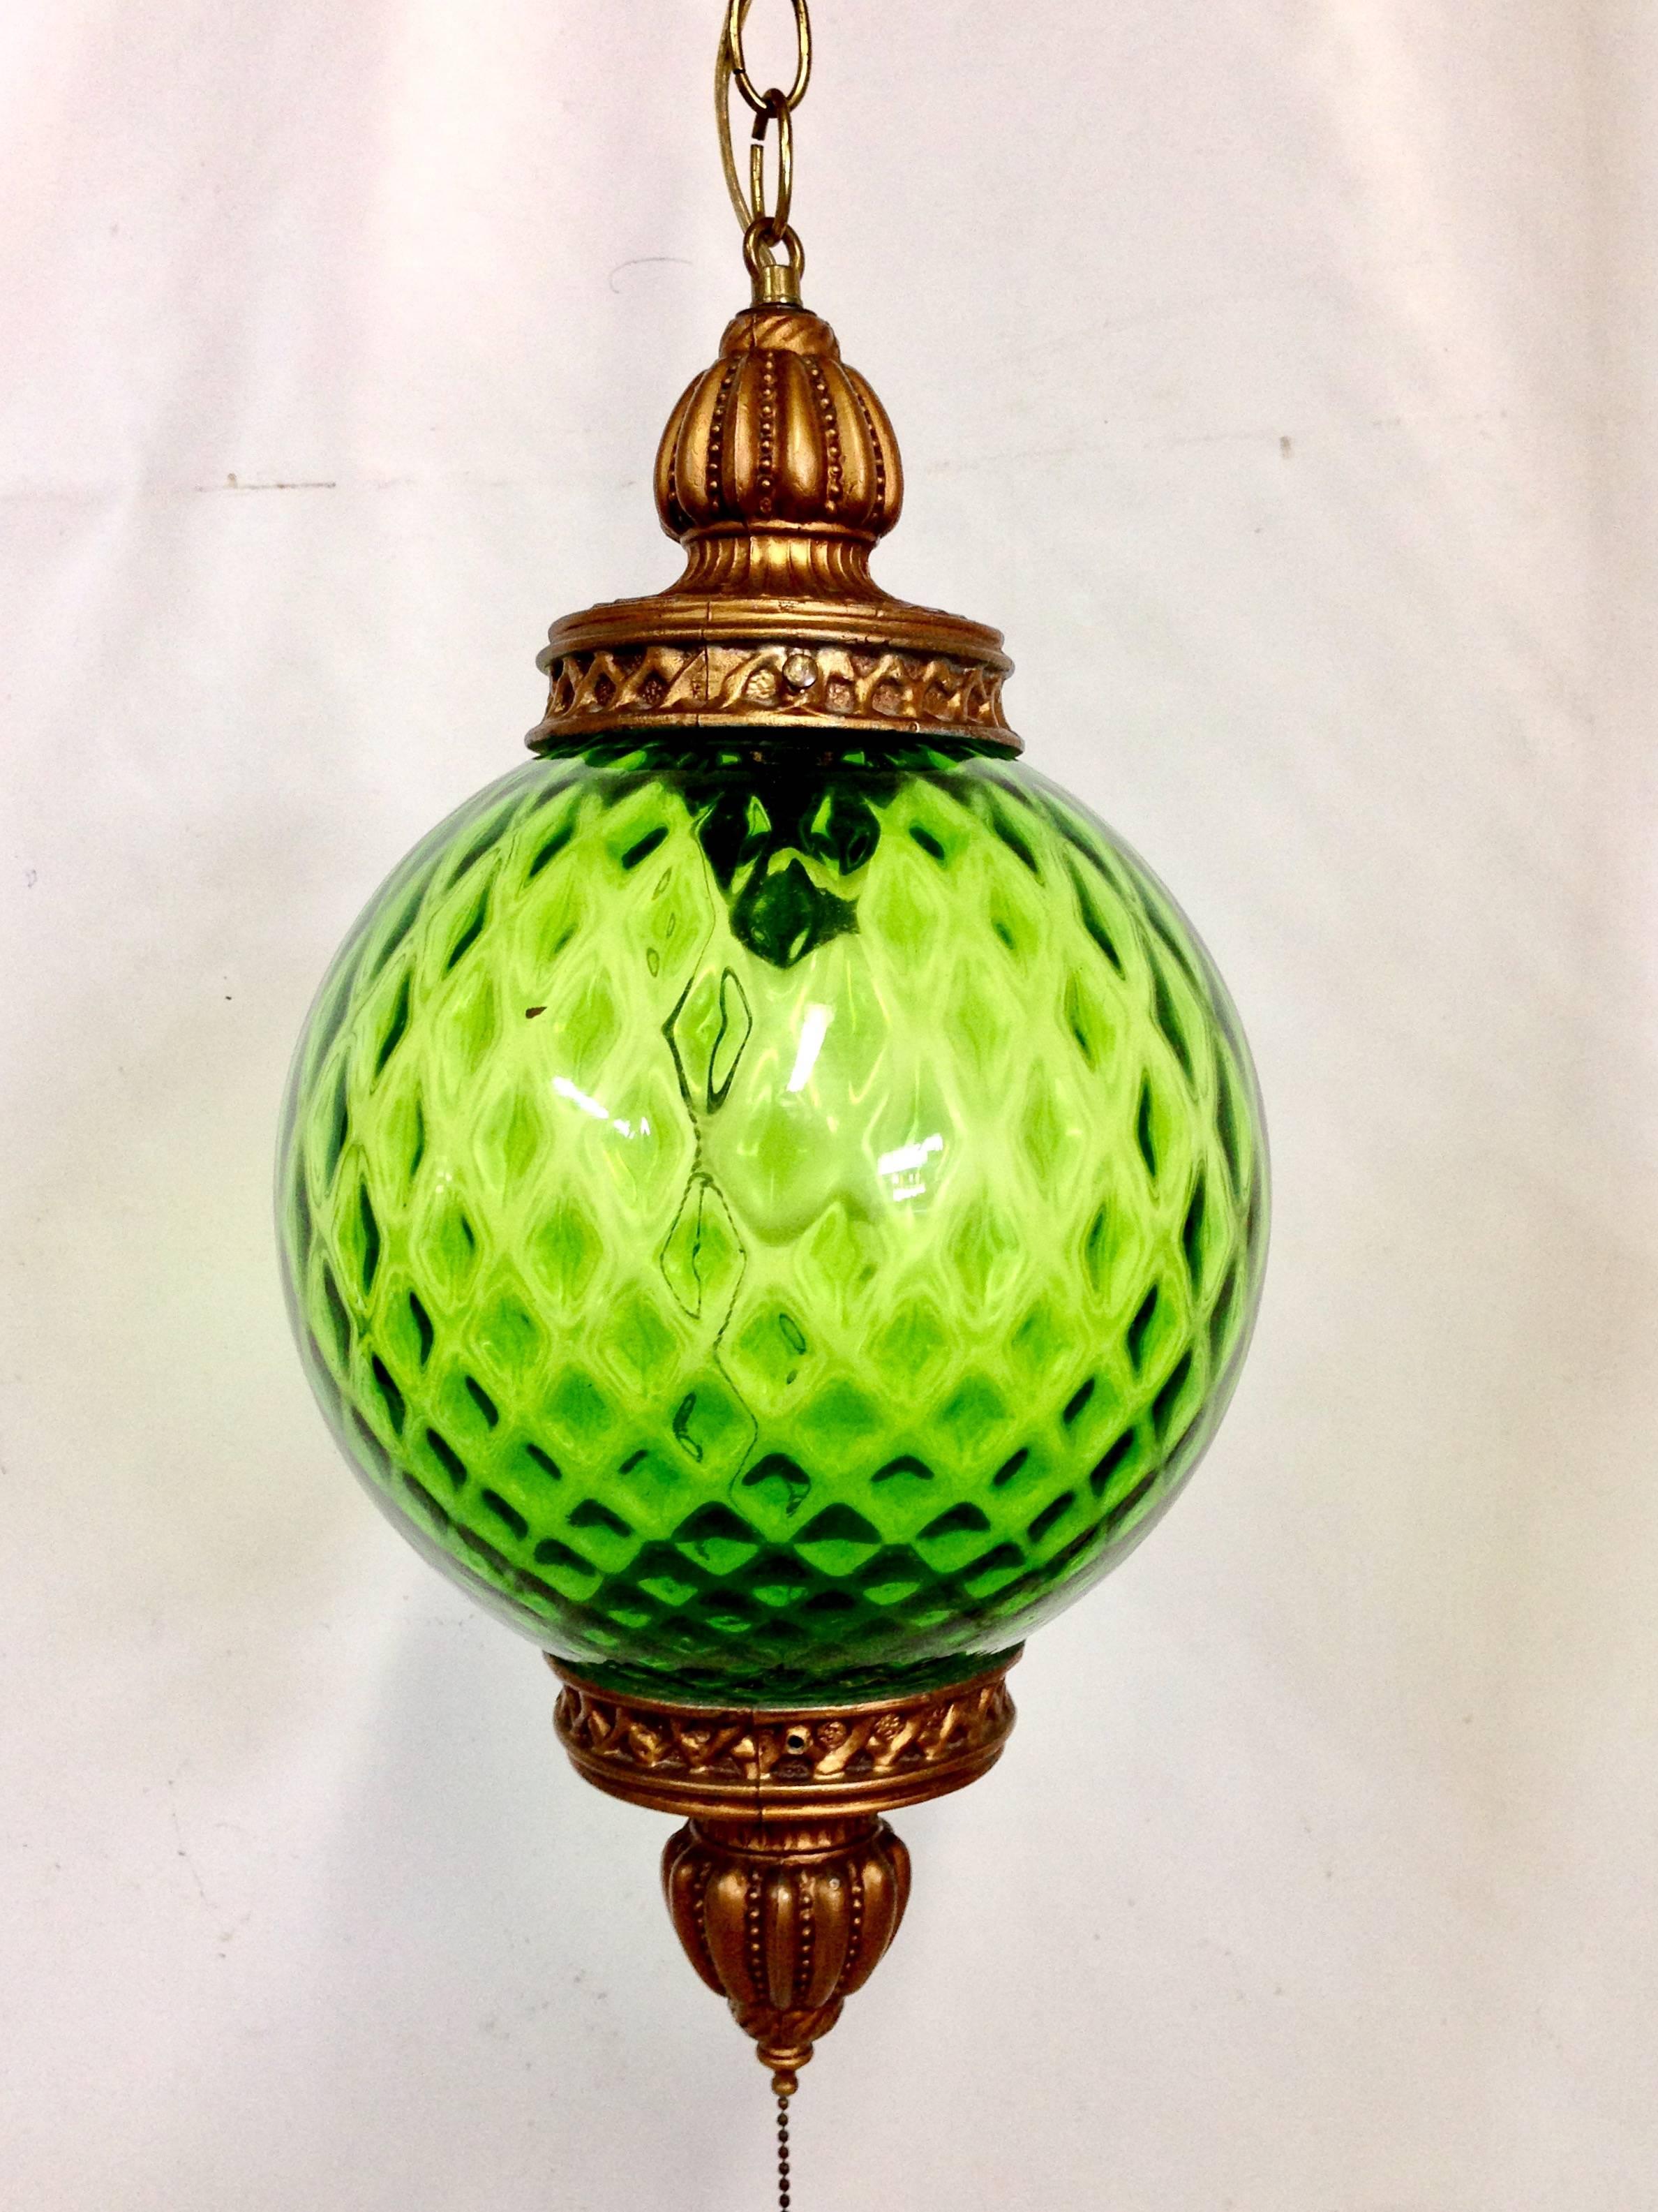 Stunning and vibrant apple green optic blown glass sphere hanging pendant light from Italy. Antiqued brass metal detail.
Details:
Green globe: 10" inches diameter, 19" inches from top of brass to bottom of brass base of globe.
Pull chain